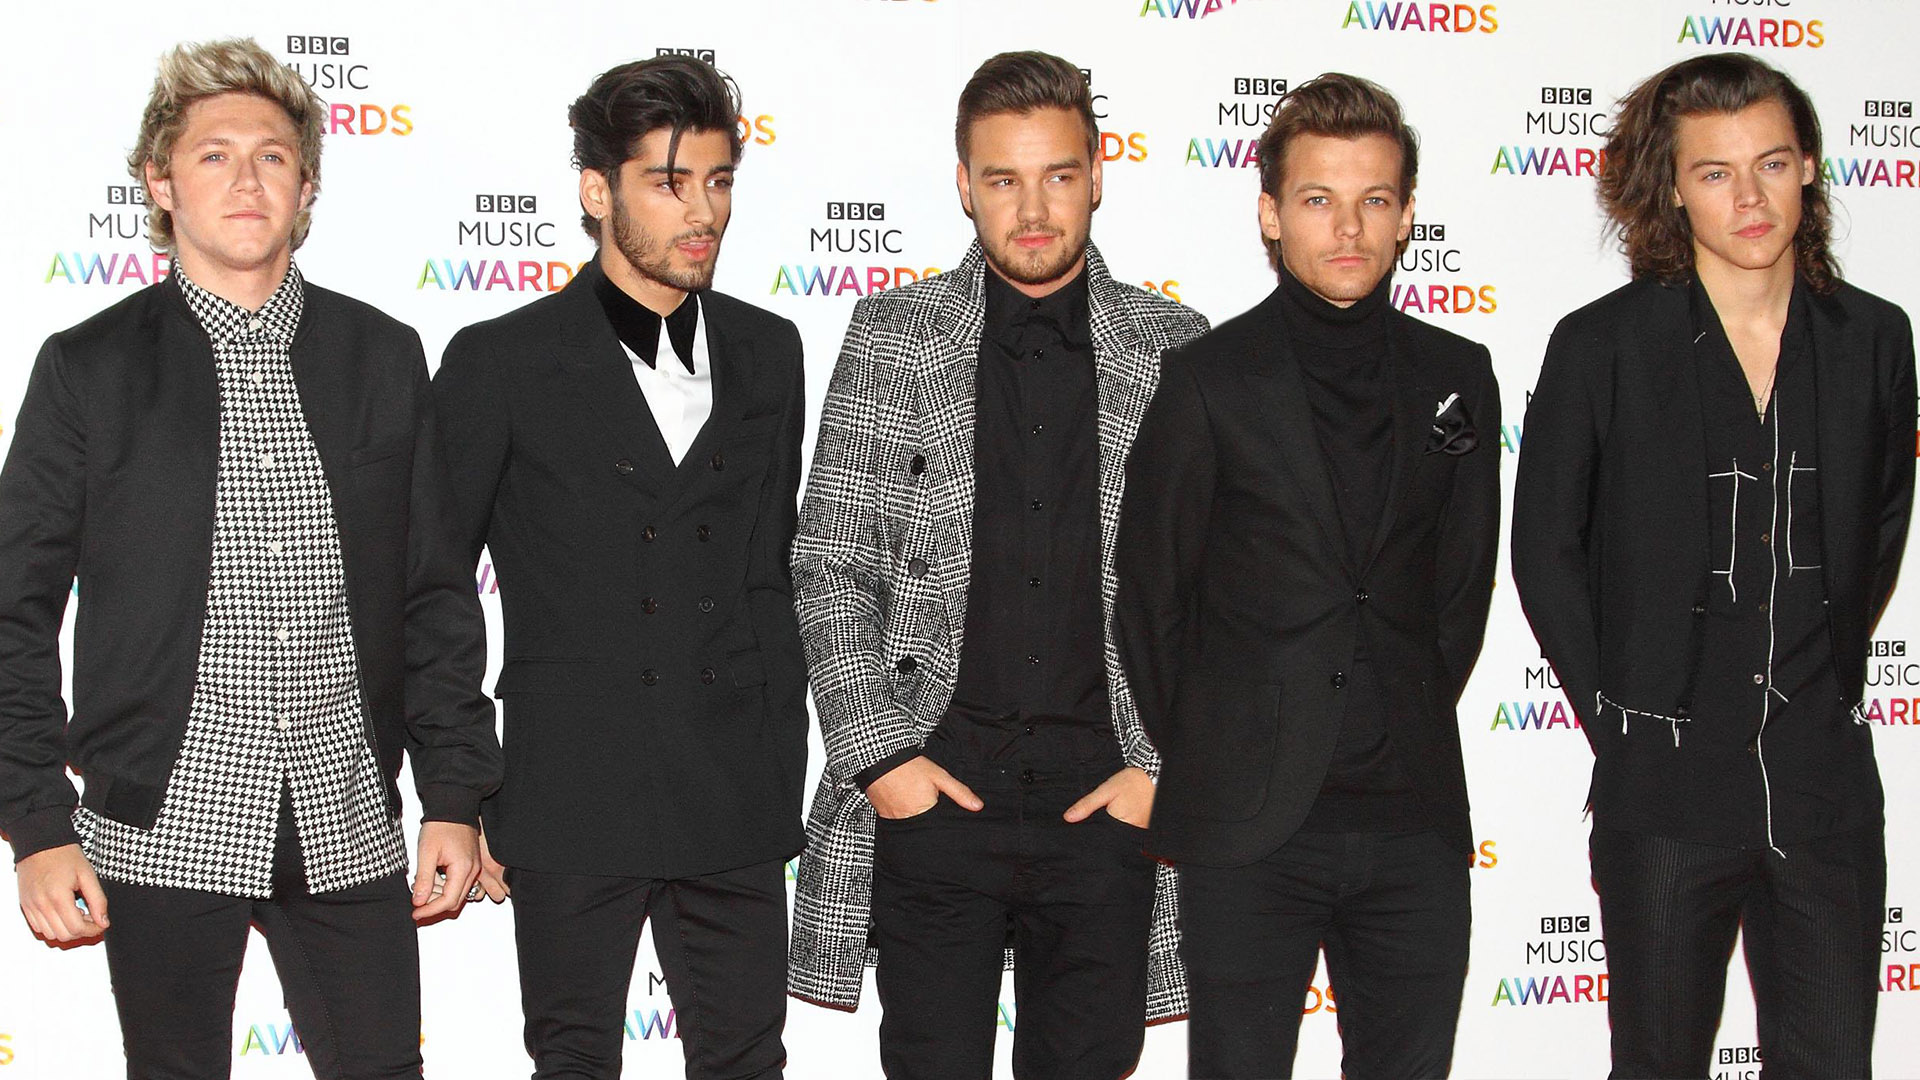 7 Years After Break-up, Here's the Richest Member of One Direction